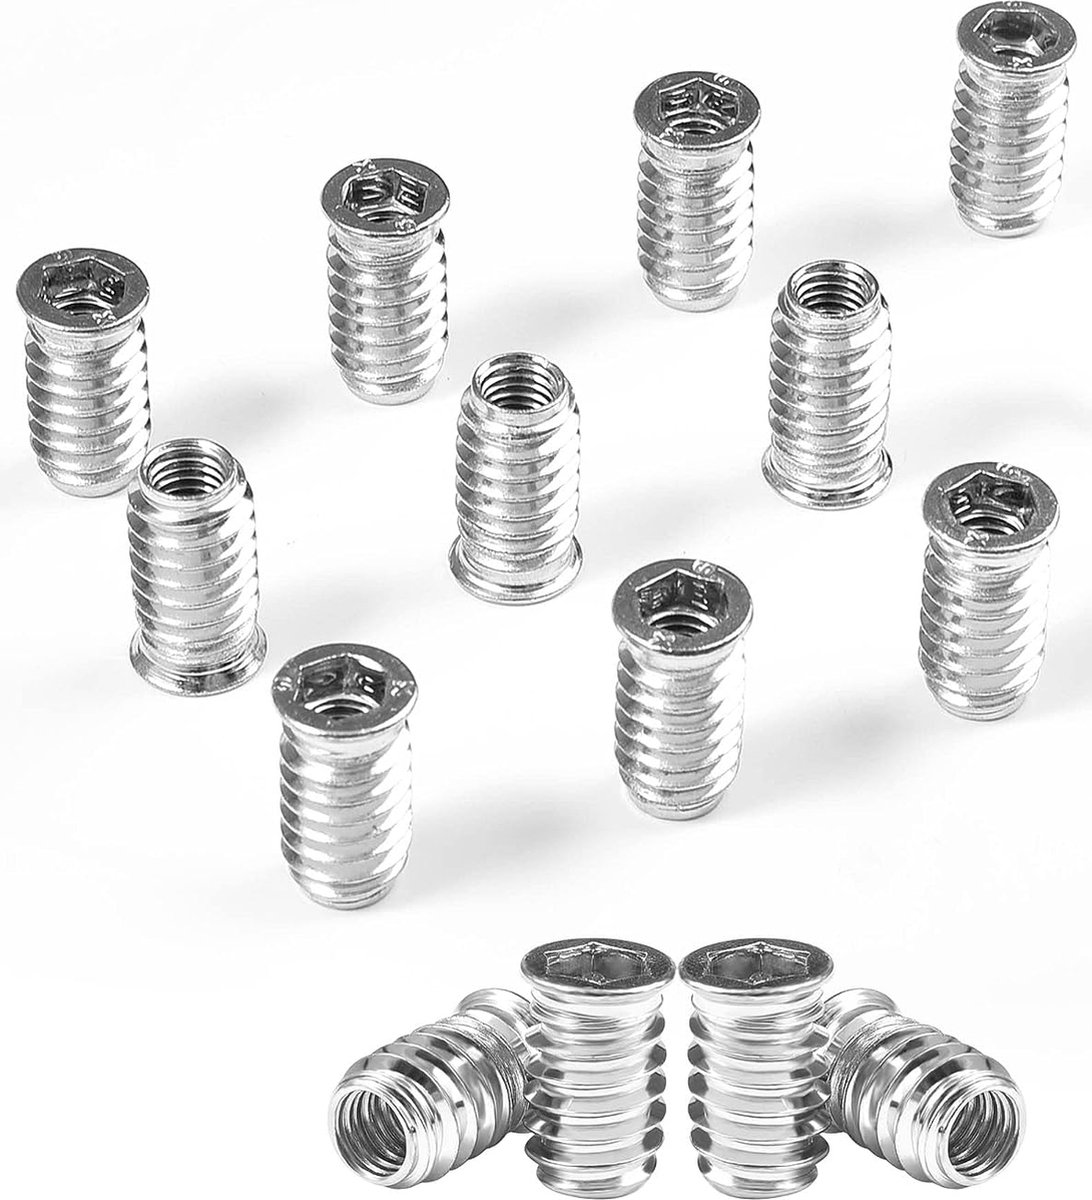 Screw-In Nut M8 Sockets M8 x 24 mm Screw-In Sleeve Threaded Bushing with Covering Edge Threaded Insert Hex Allen Nuts Nickel-Plated Carbon Steel for Wooden Furniture Pack of 50